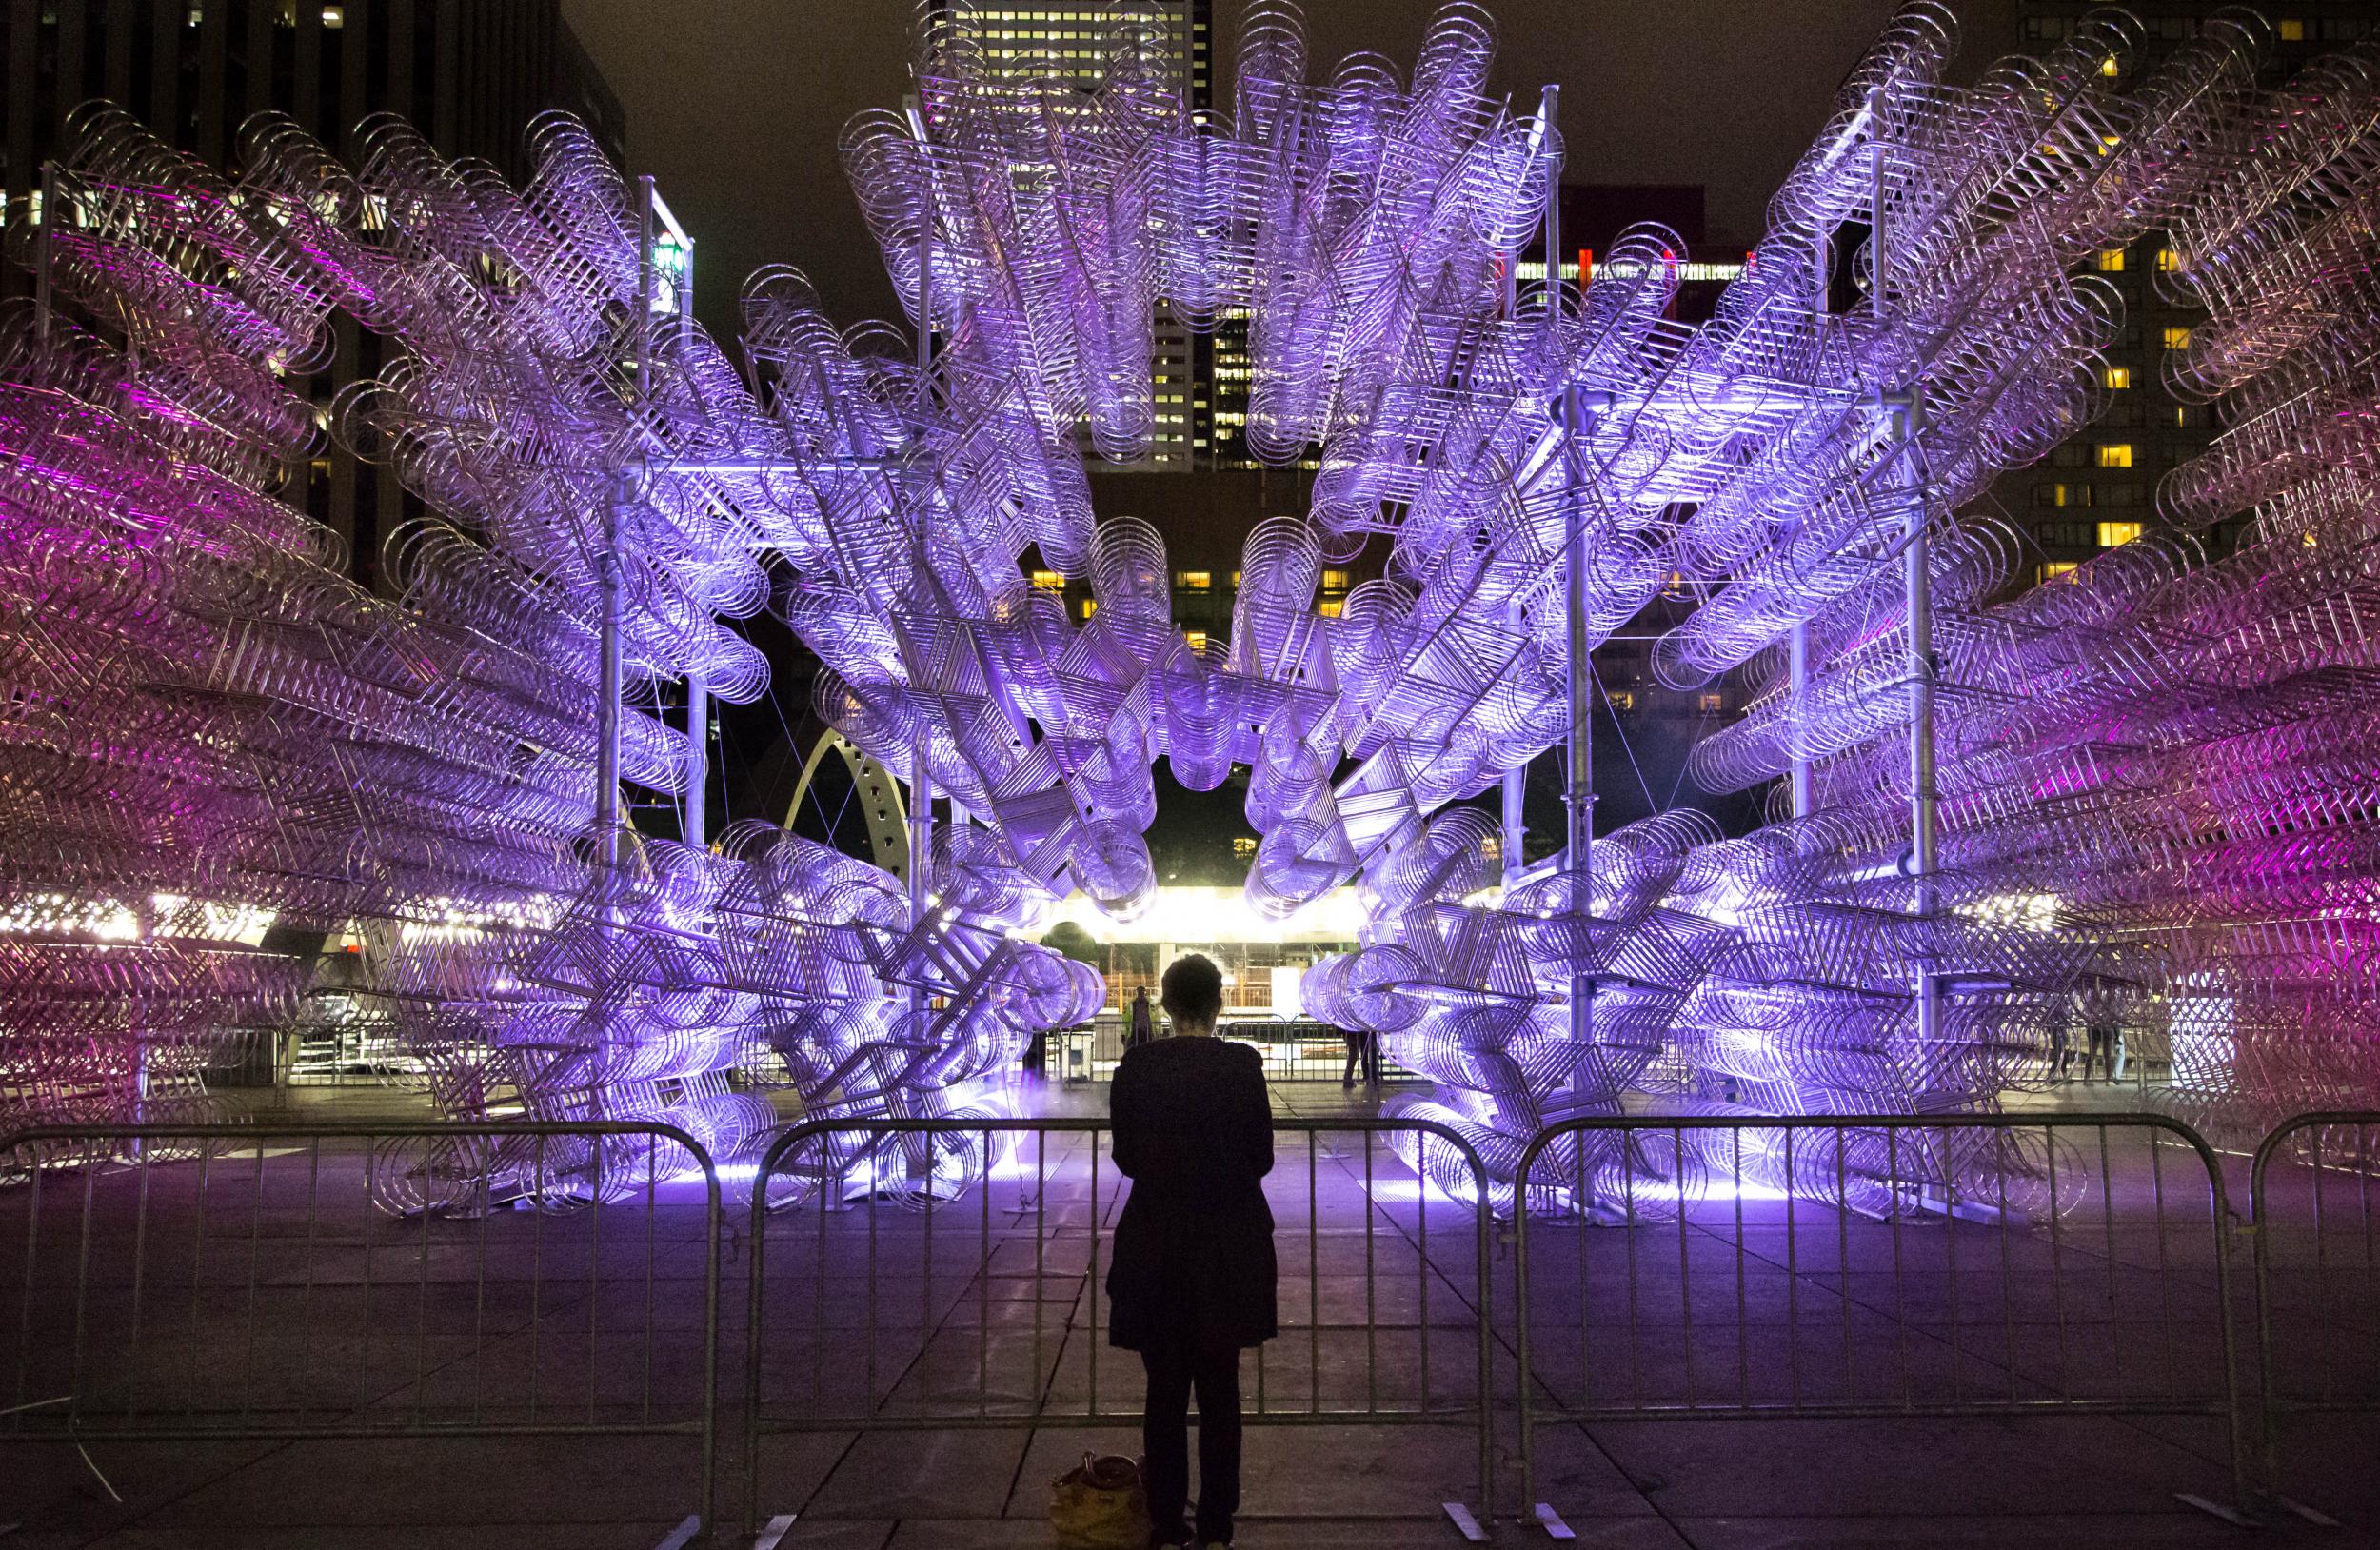 The Nuit Blanche arts festival lights up the city